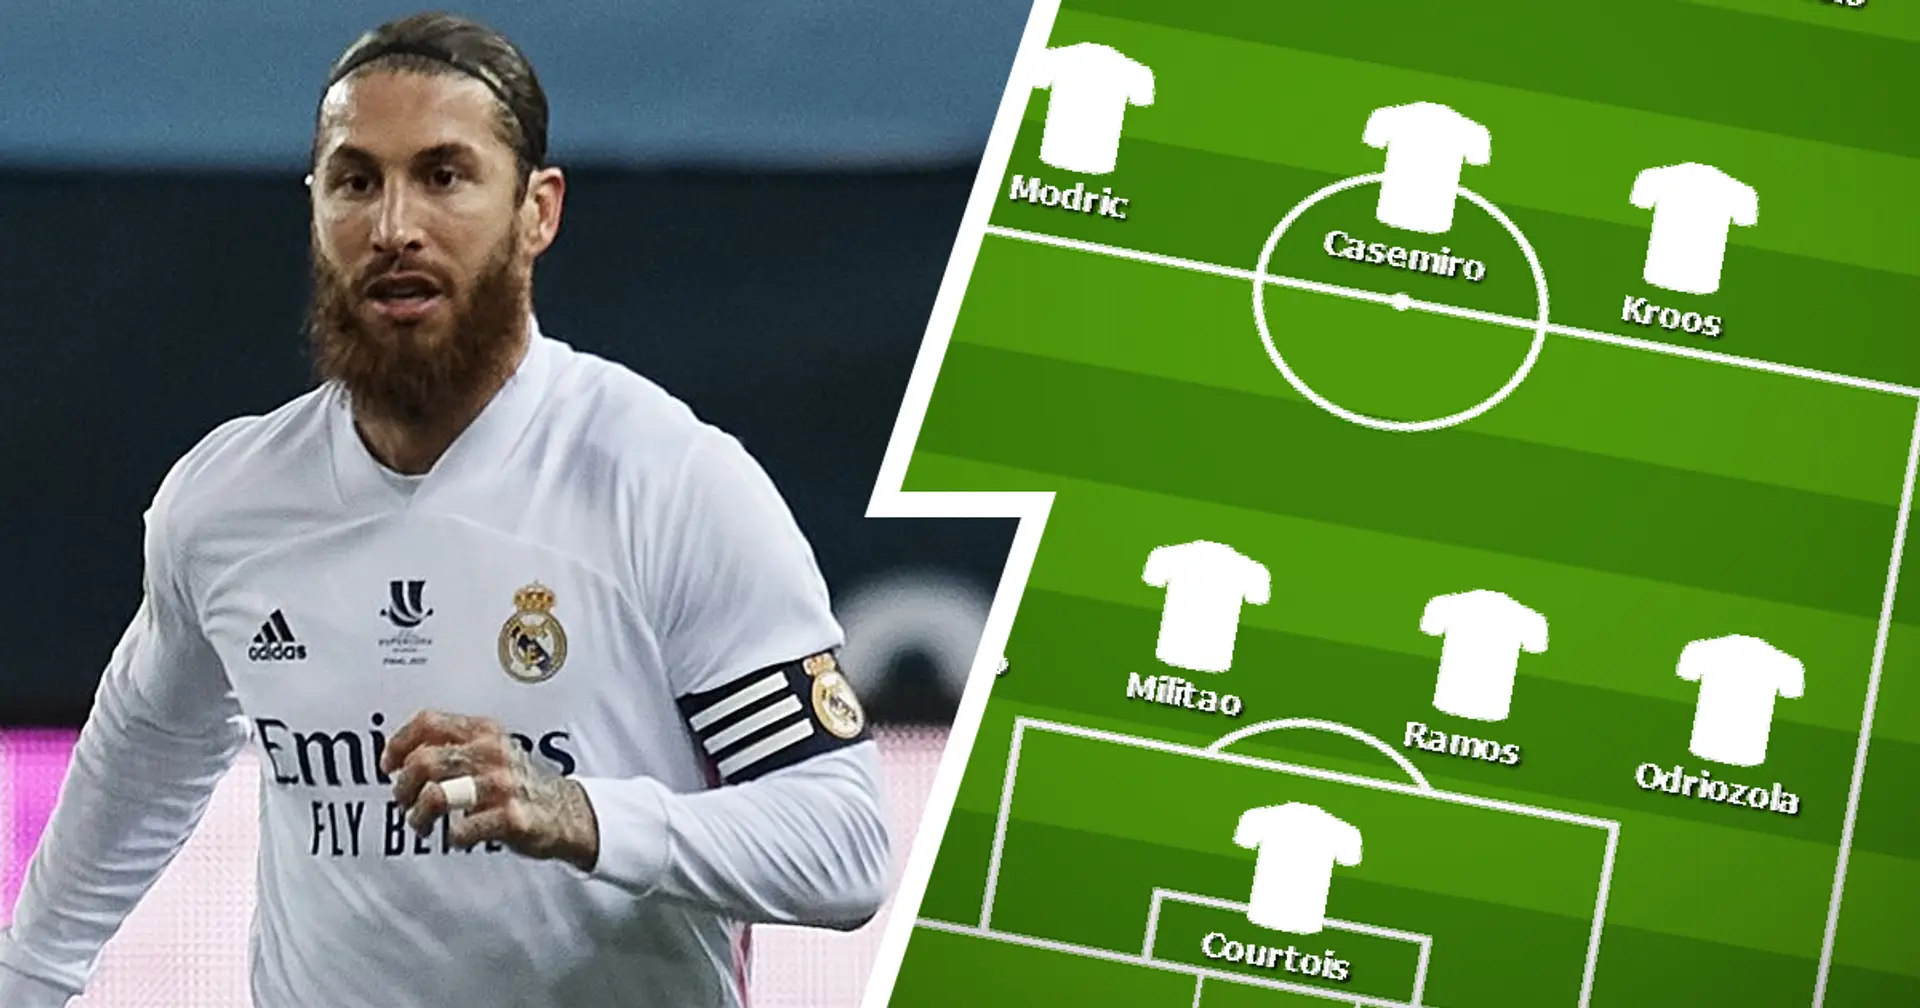 Ramos to start? Select ultimate XI for Chelsea clash from 2 options